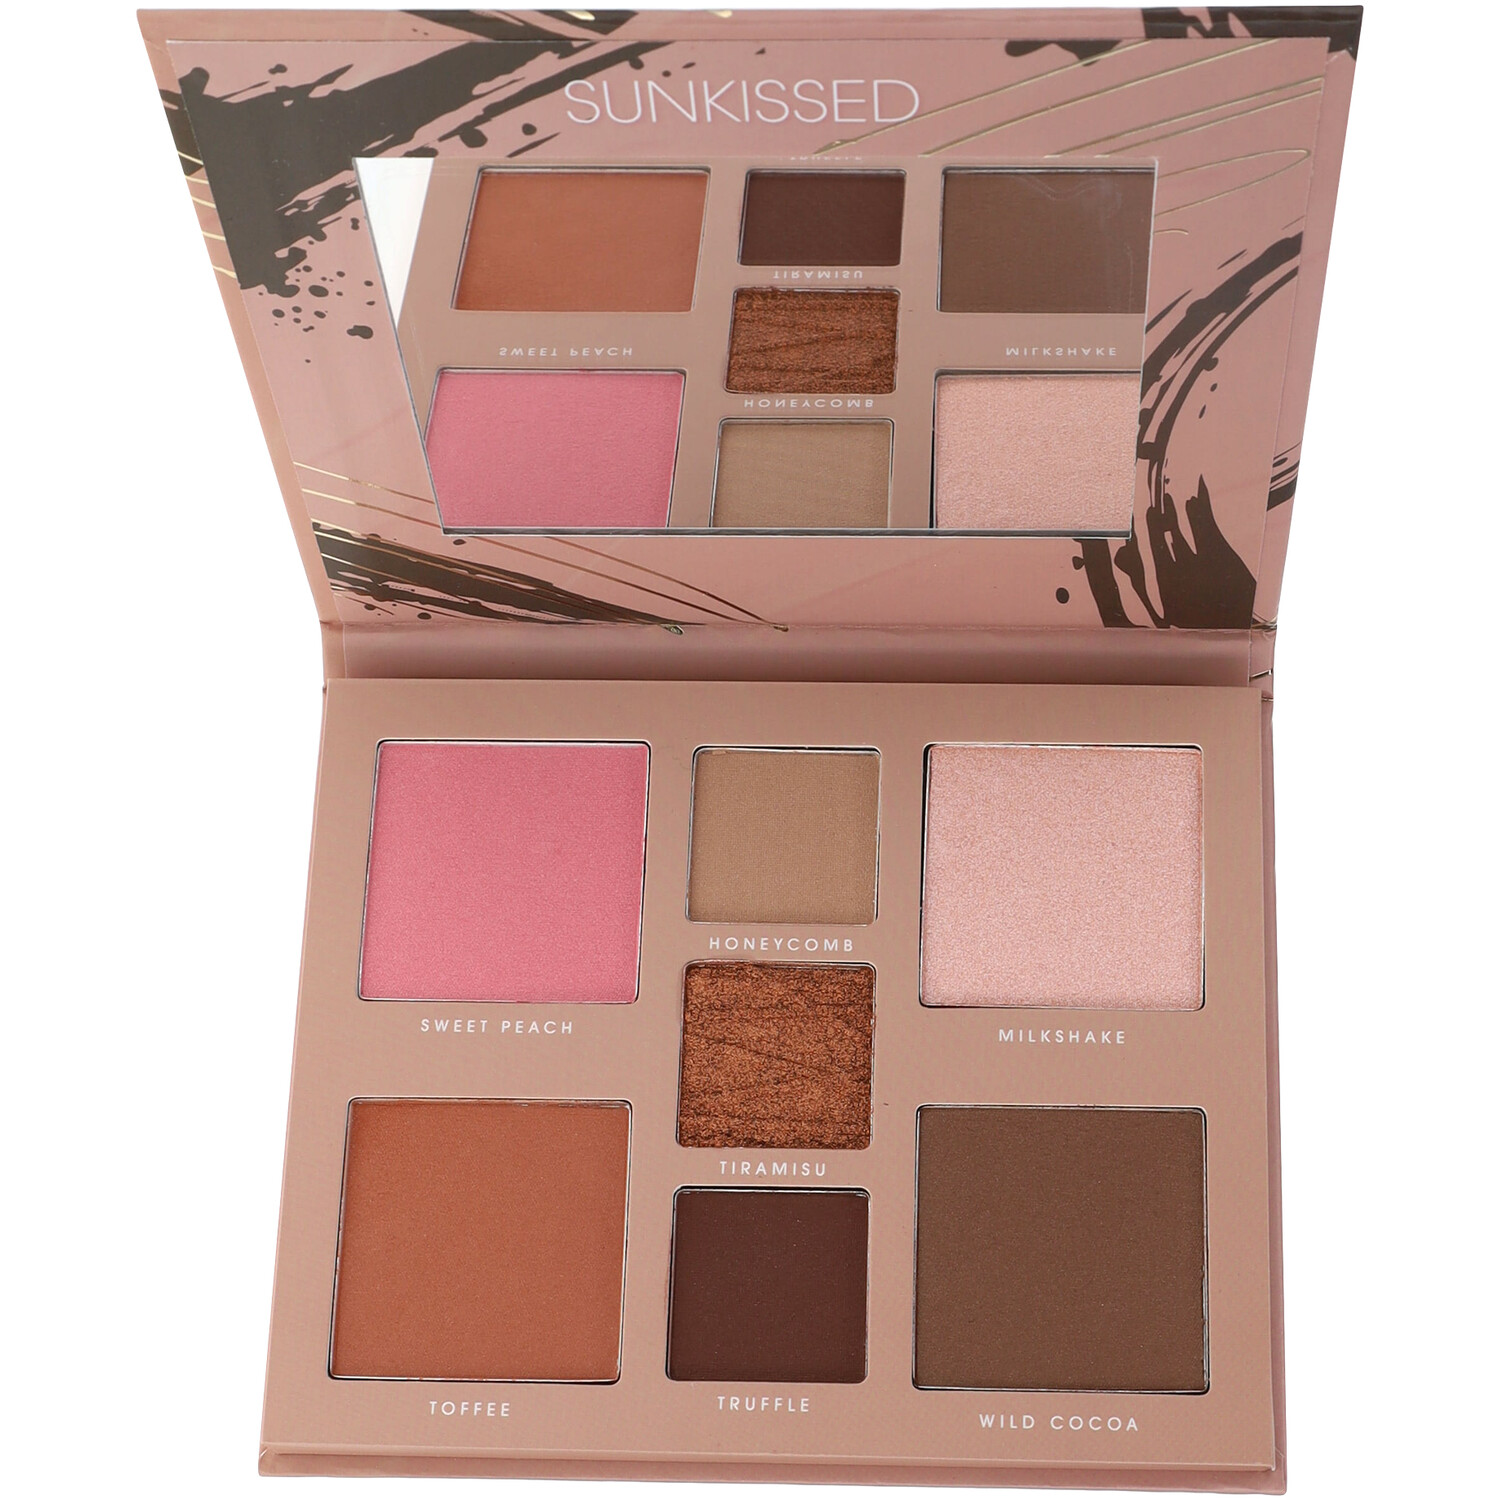 Sunkissed Heavenly Fudge Face Palette - Brown Image 2